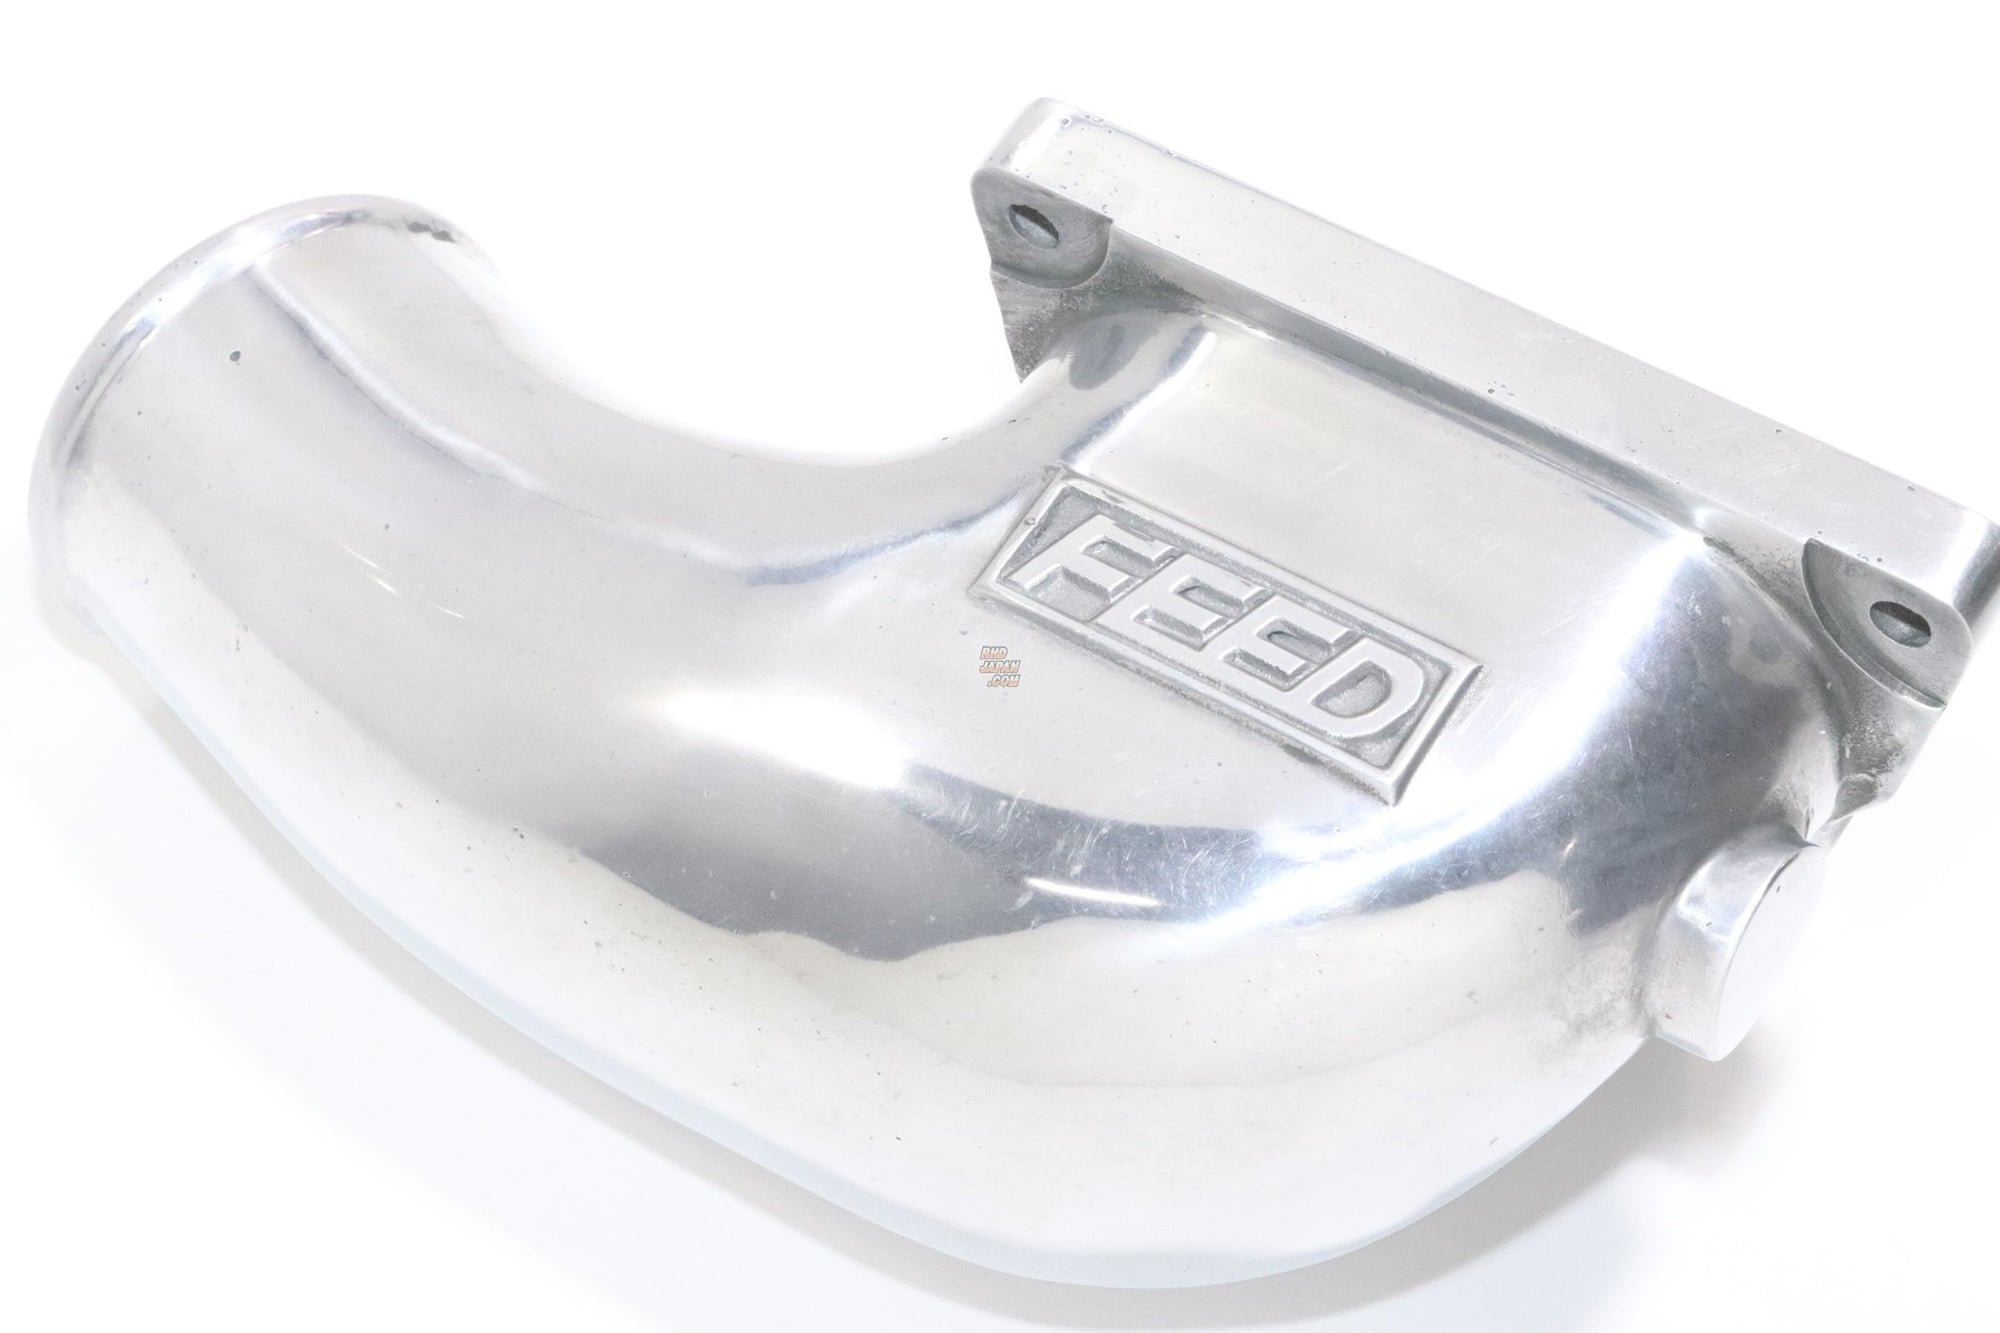 Engine - Intake/Fuel - WTB - WTT - HKS V-mount Elbow for Feed Elbow - New or Used - 1993 to 2002 Mazda RX-7 - Puerto Rico